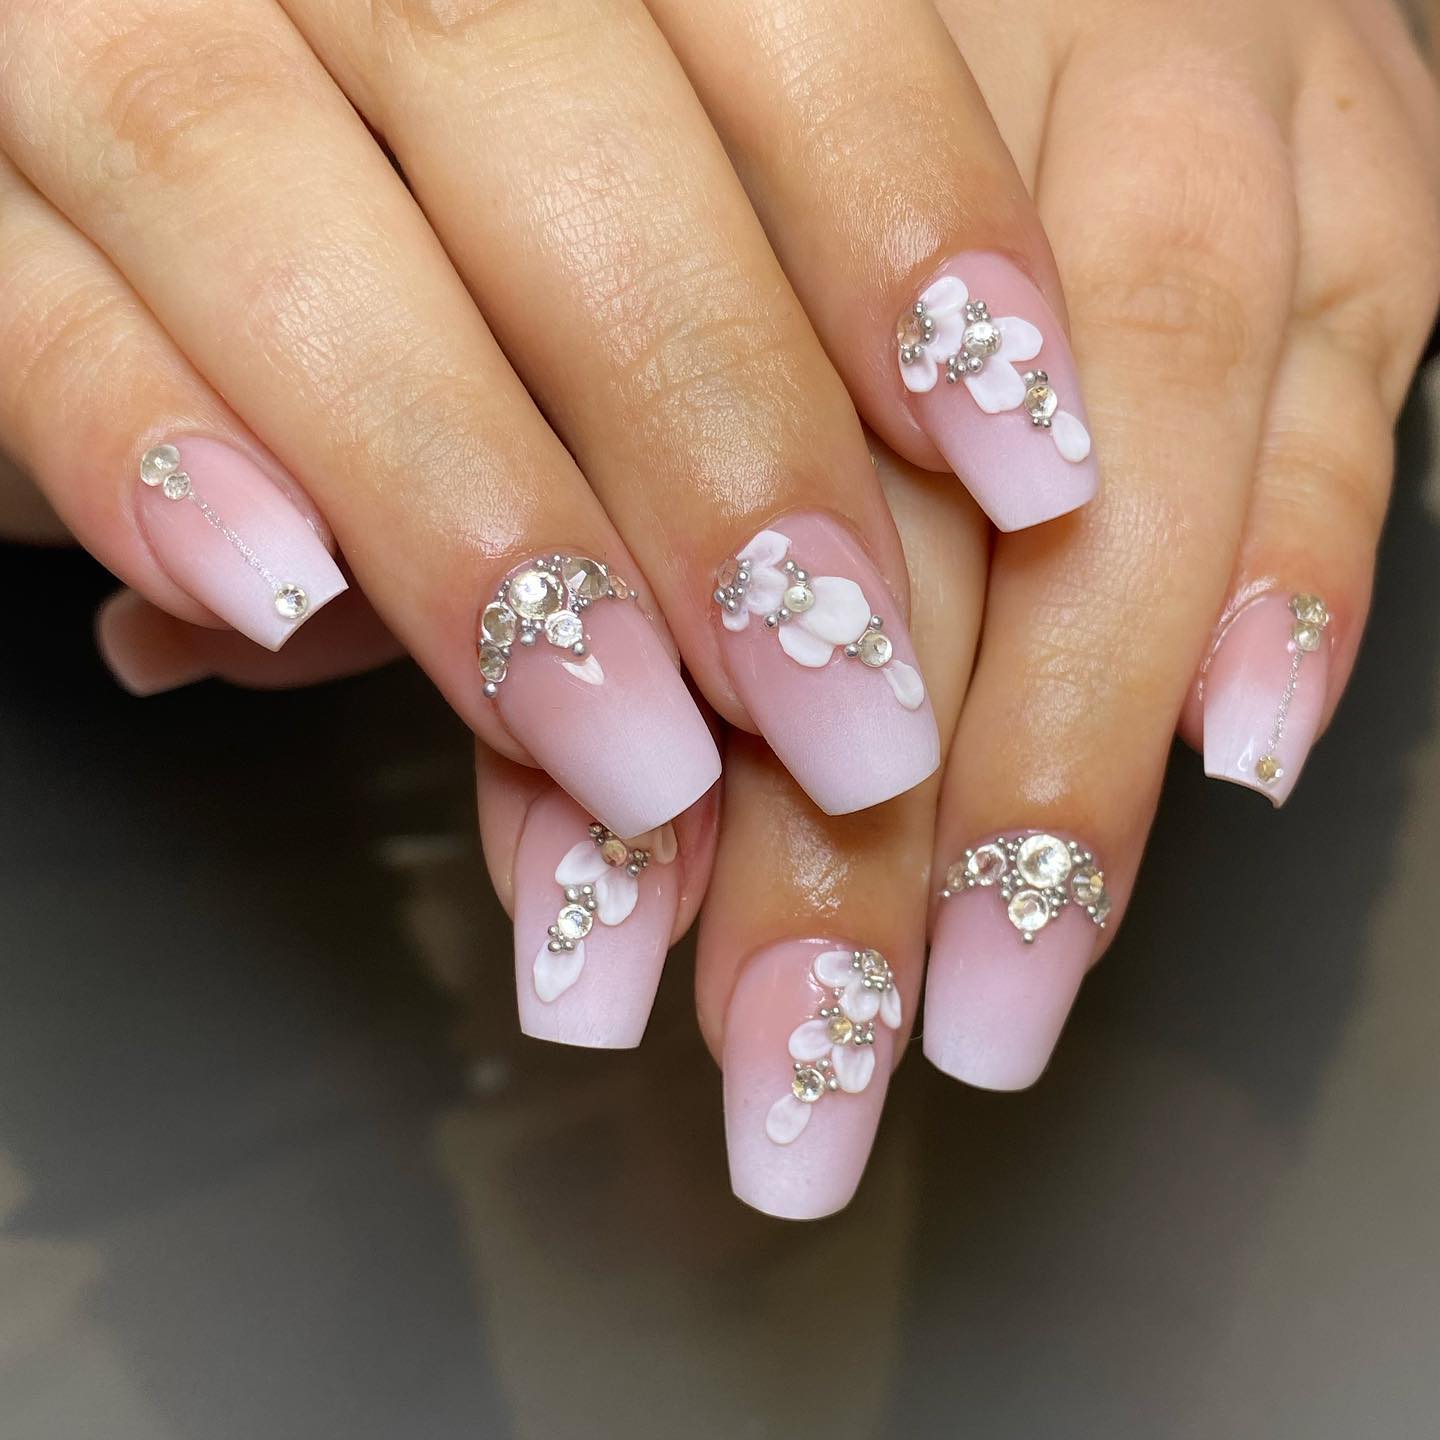 With the help of its shading effects, ombre nails are always a popular choice for many women. Adding your personality to your nails is easy if you add some decorations that indicate you are the bride.